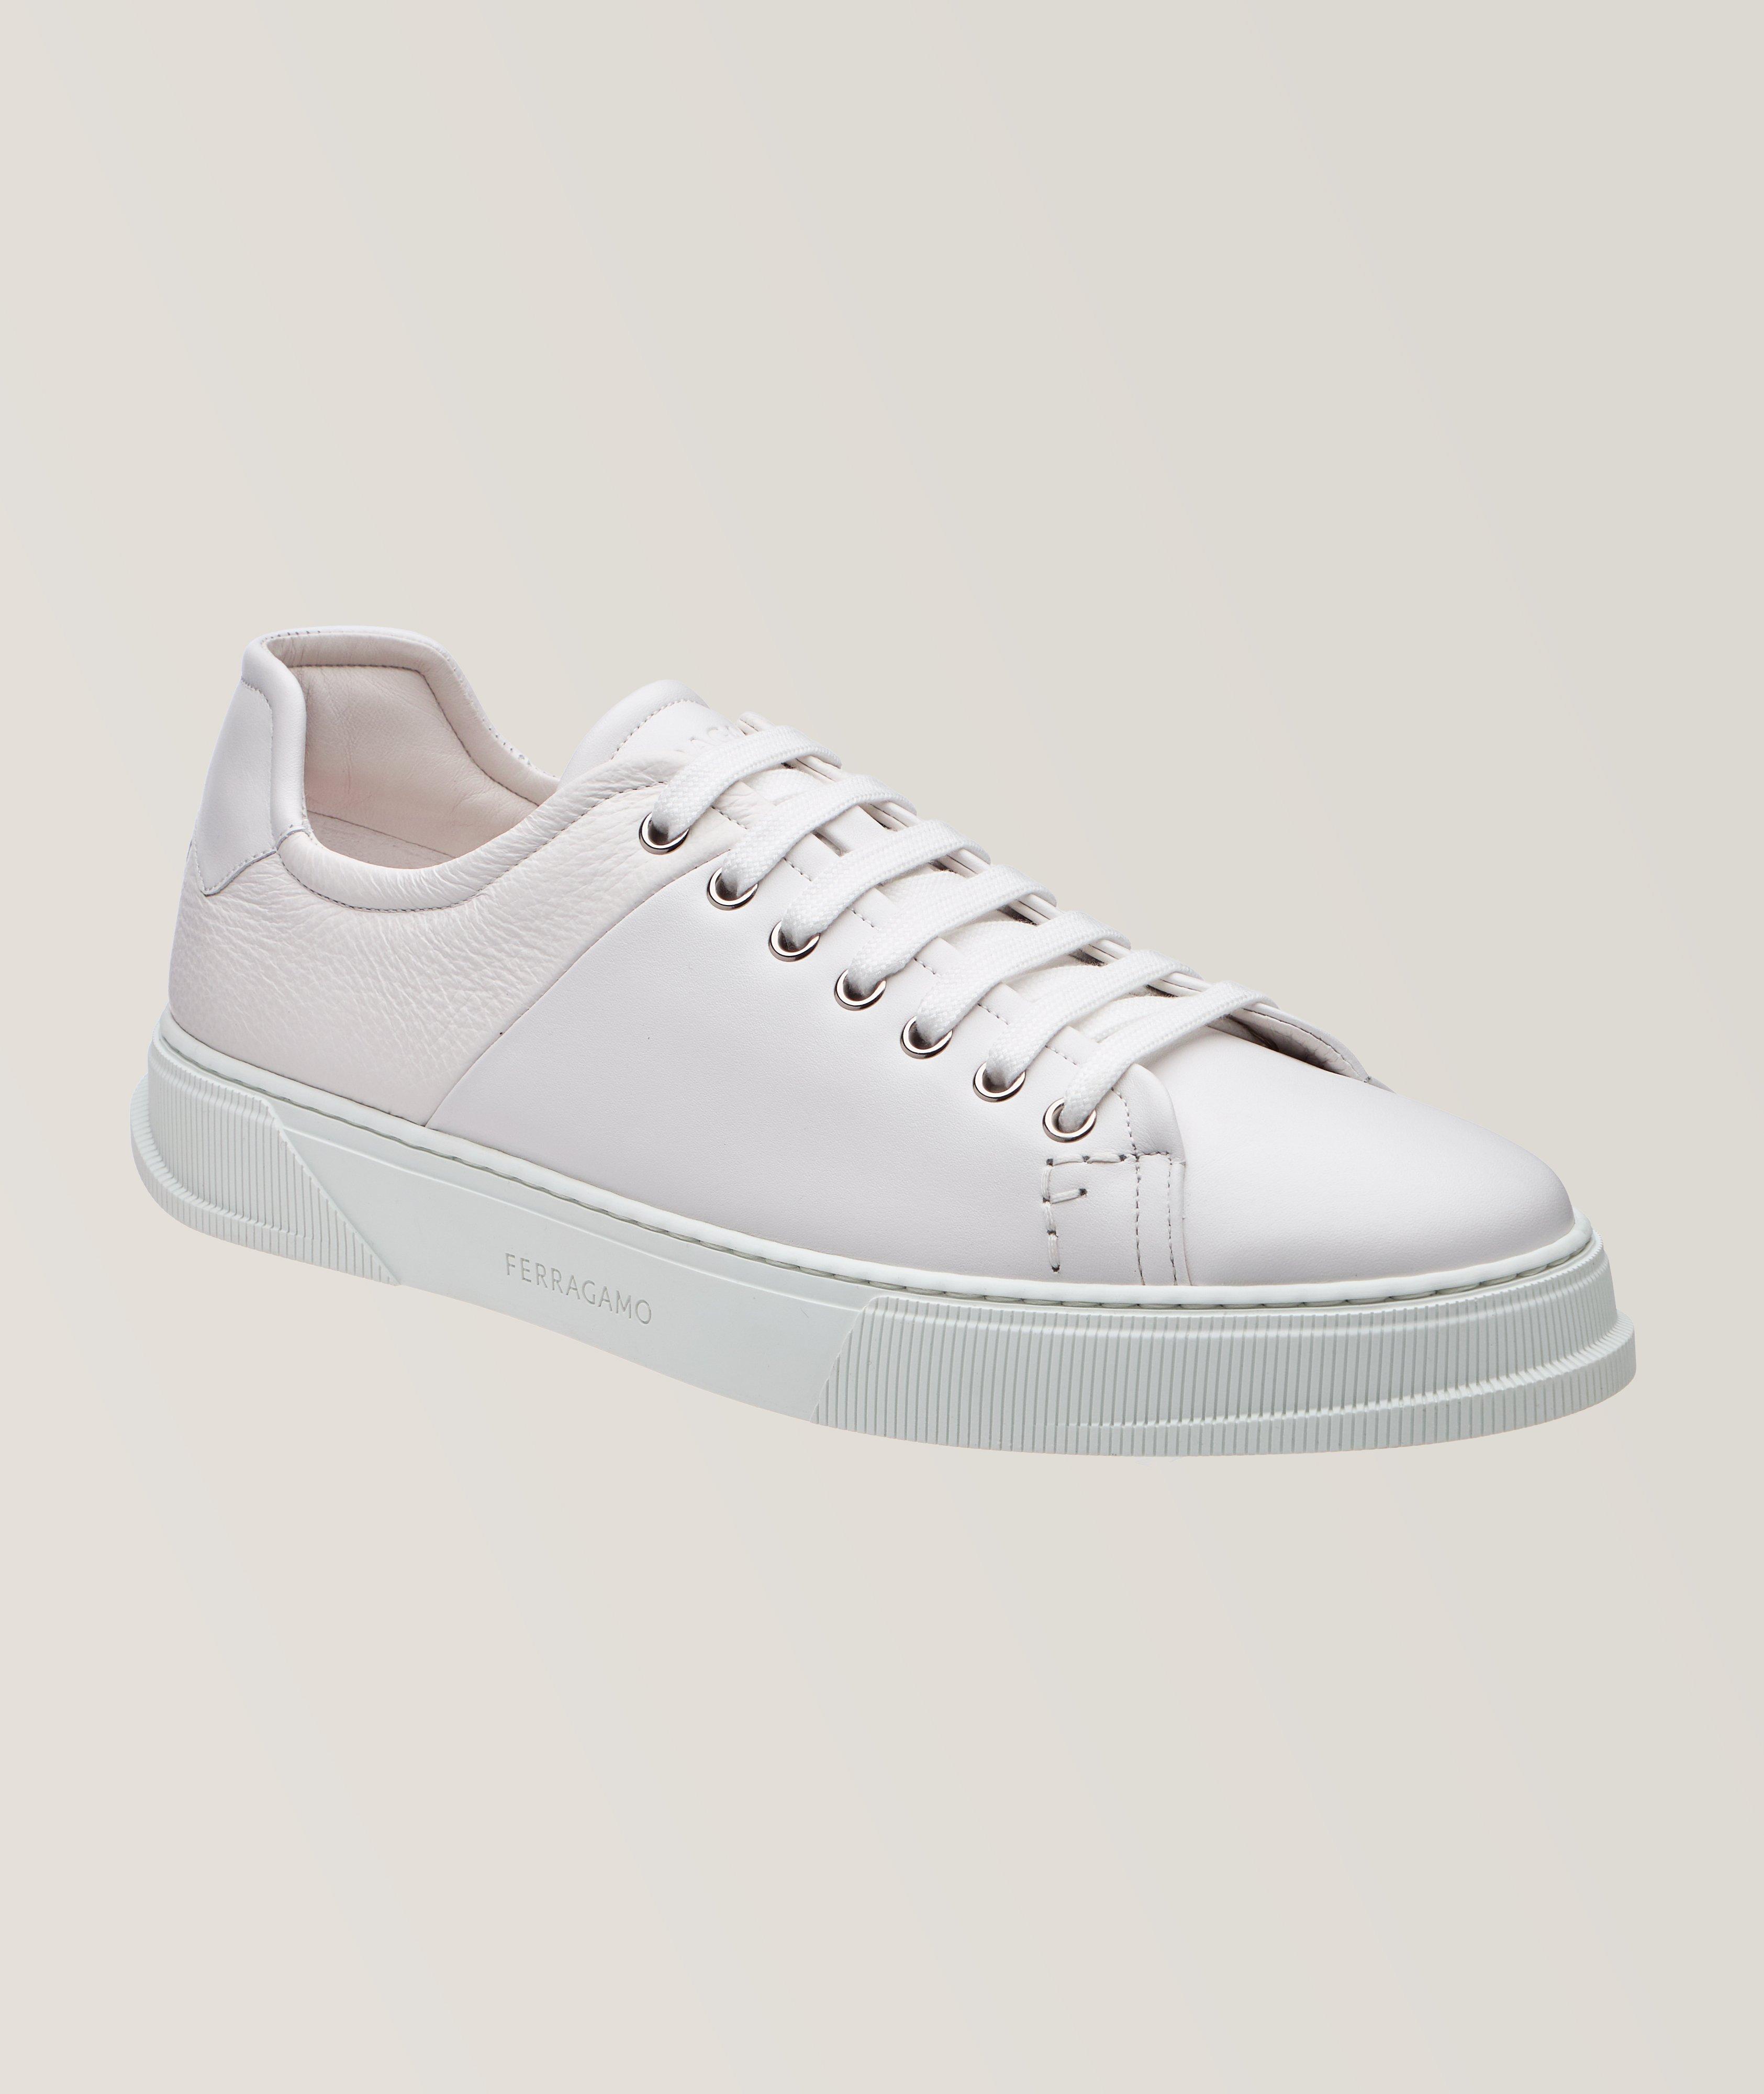 Clayton Leather Sneakers image 0